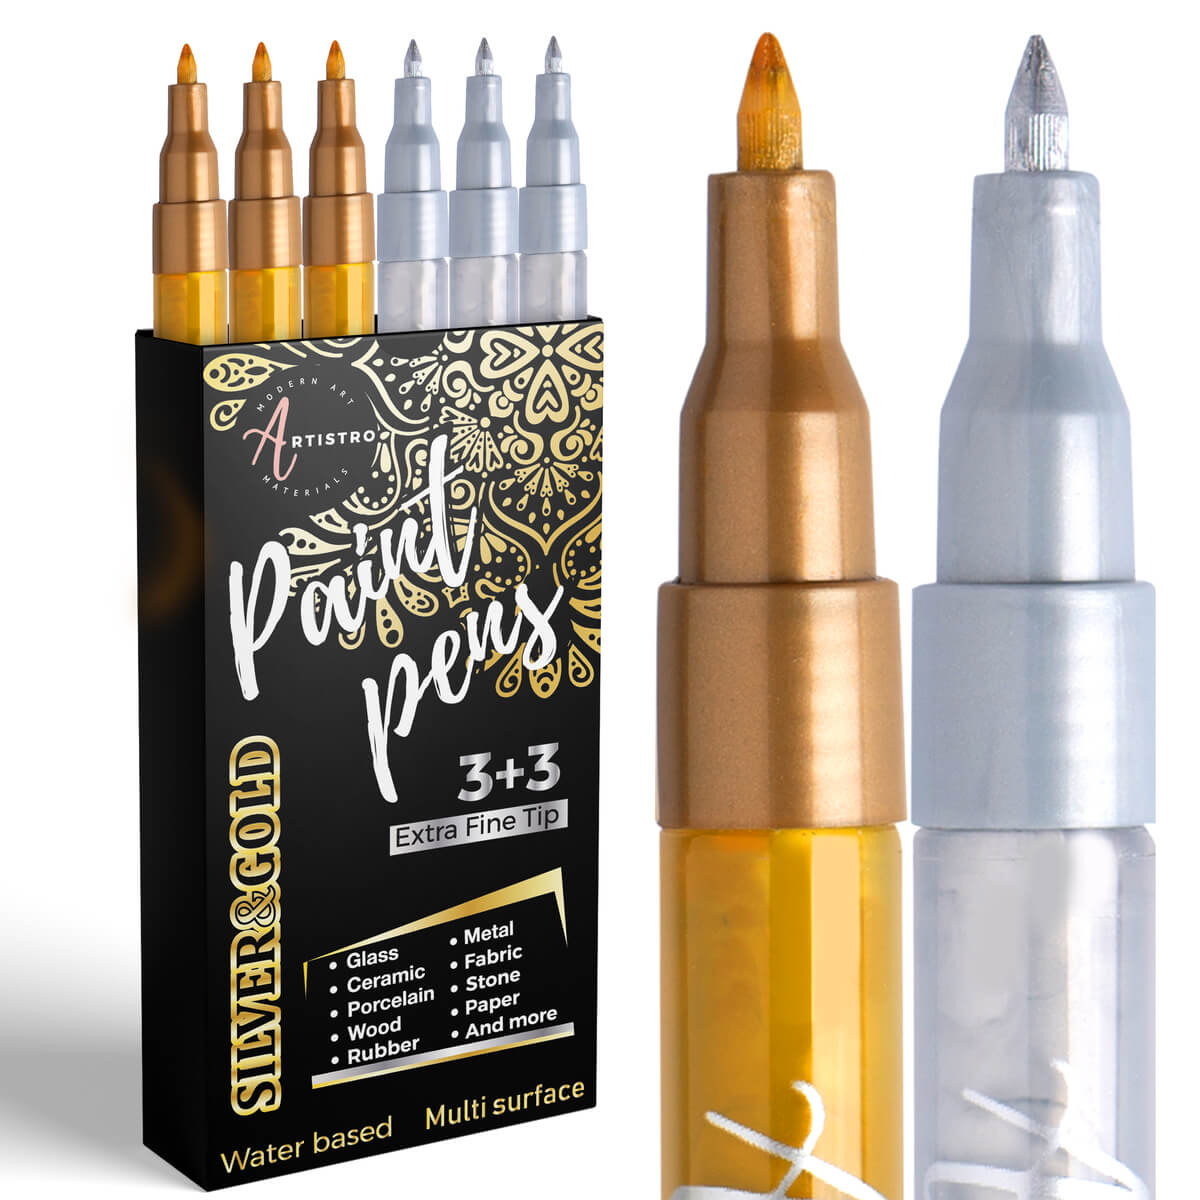 36 ARTISTRO Acrylic Paint Pens | 3 Gold & 3 Silver Extra Fine Tip Markers + 30 Medium Tip Markers for Rock, Wood, Glass, Ceramic Painting